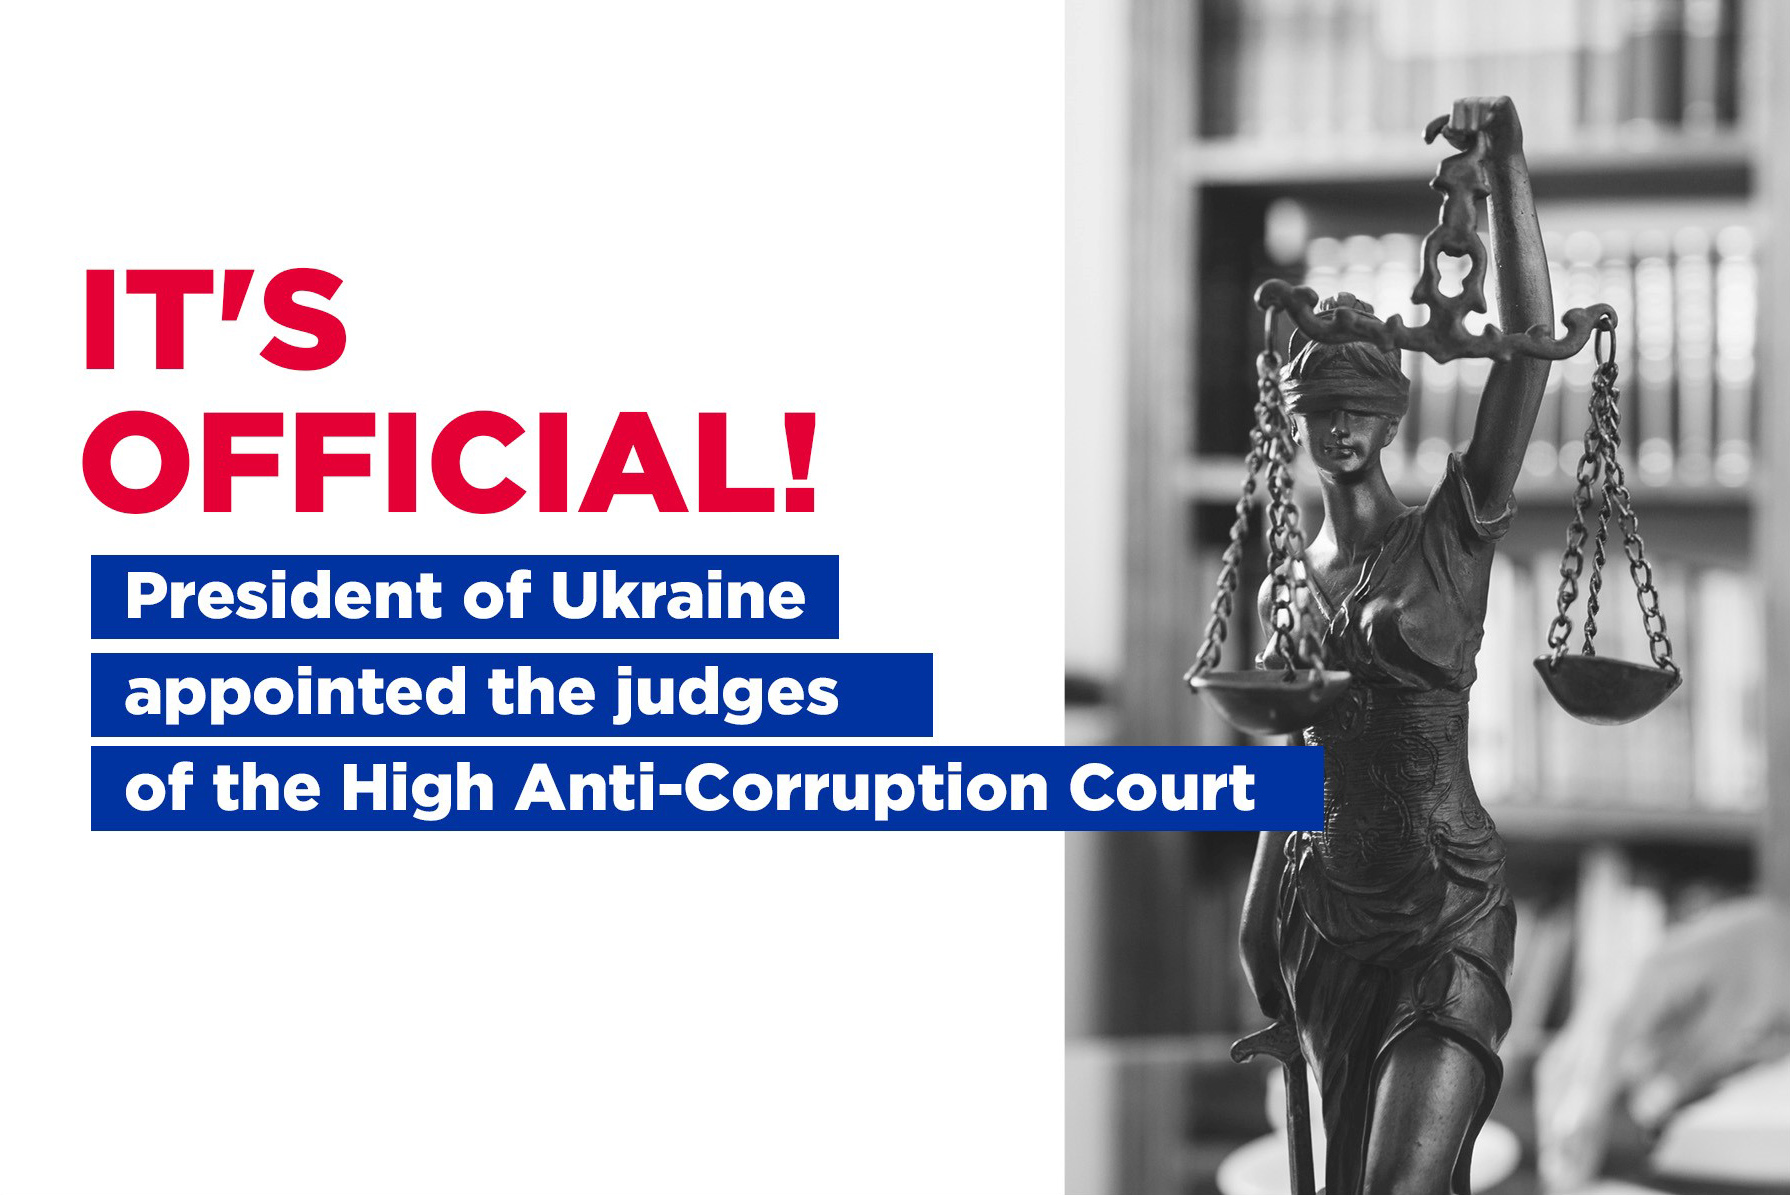 President of Ukraine appointed the judges of the High Anti-Corruption Court